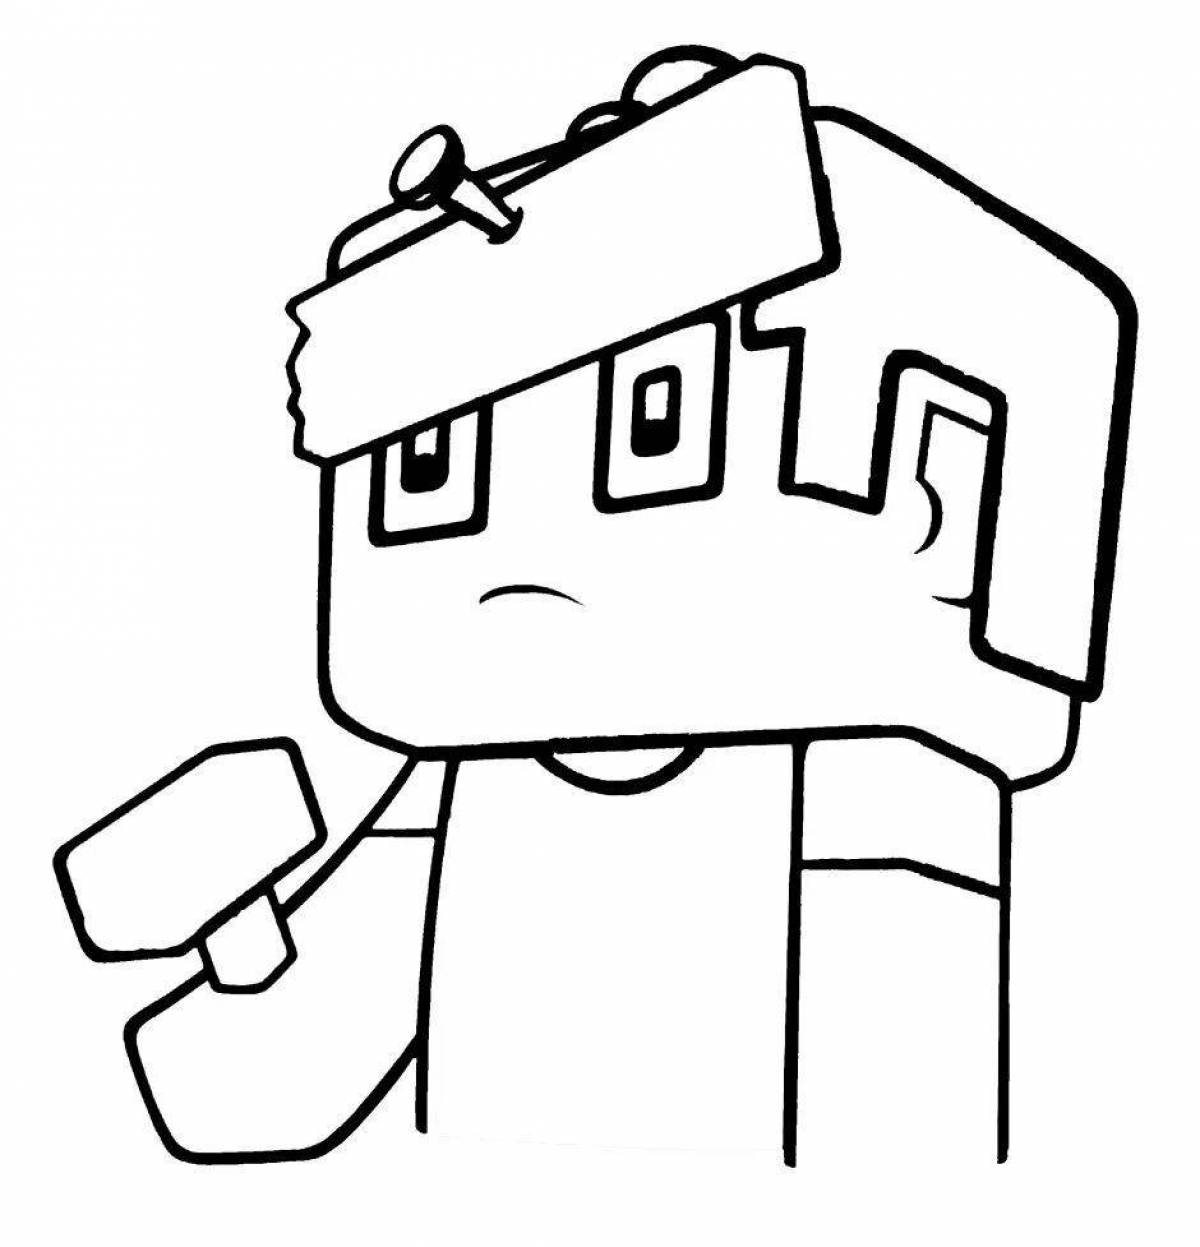 Smart robber from minecraft